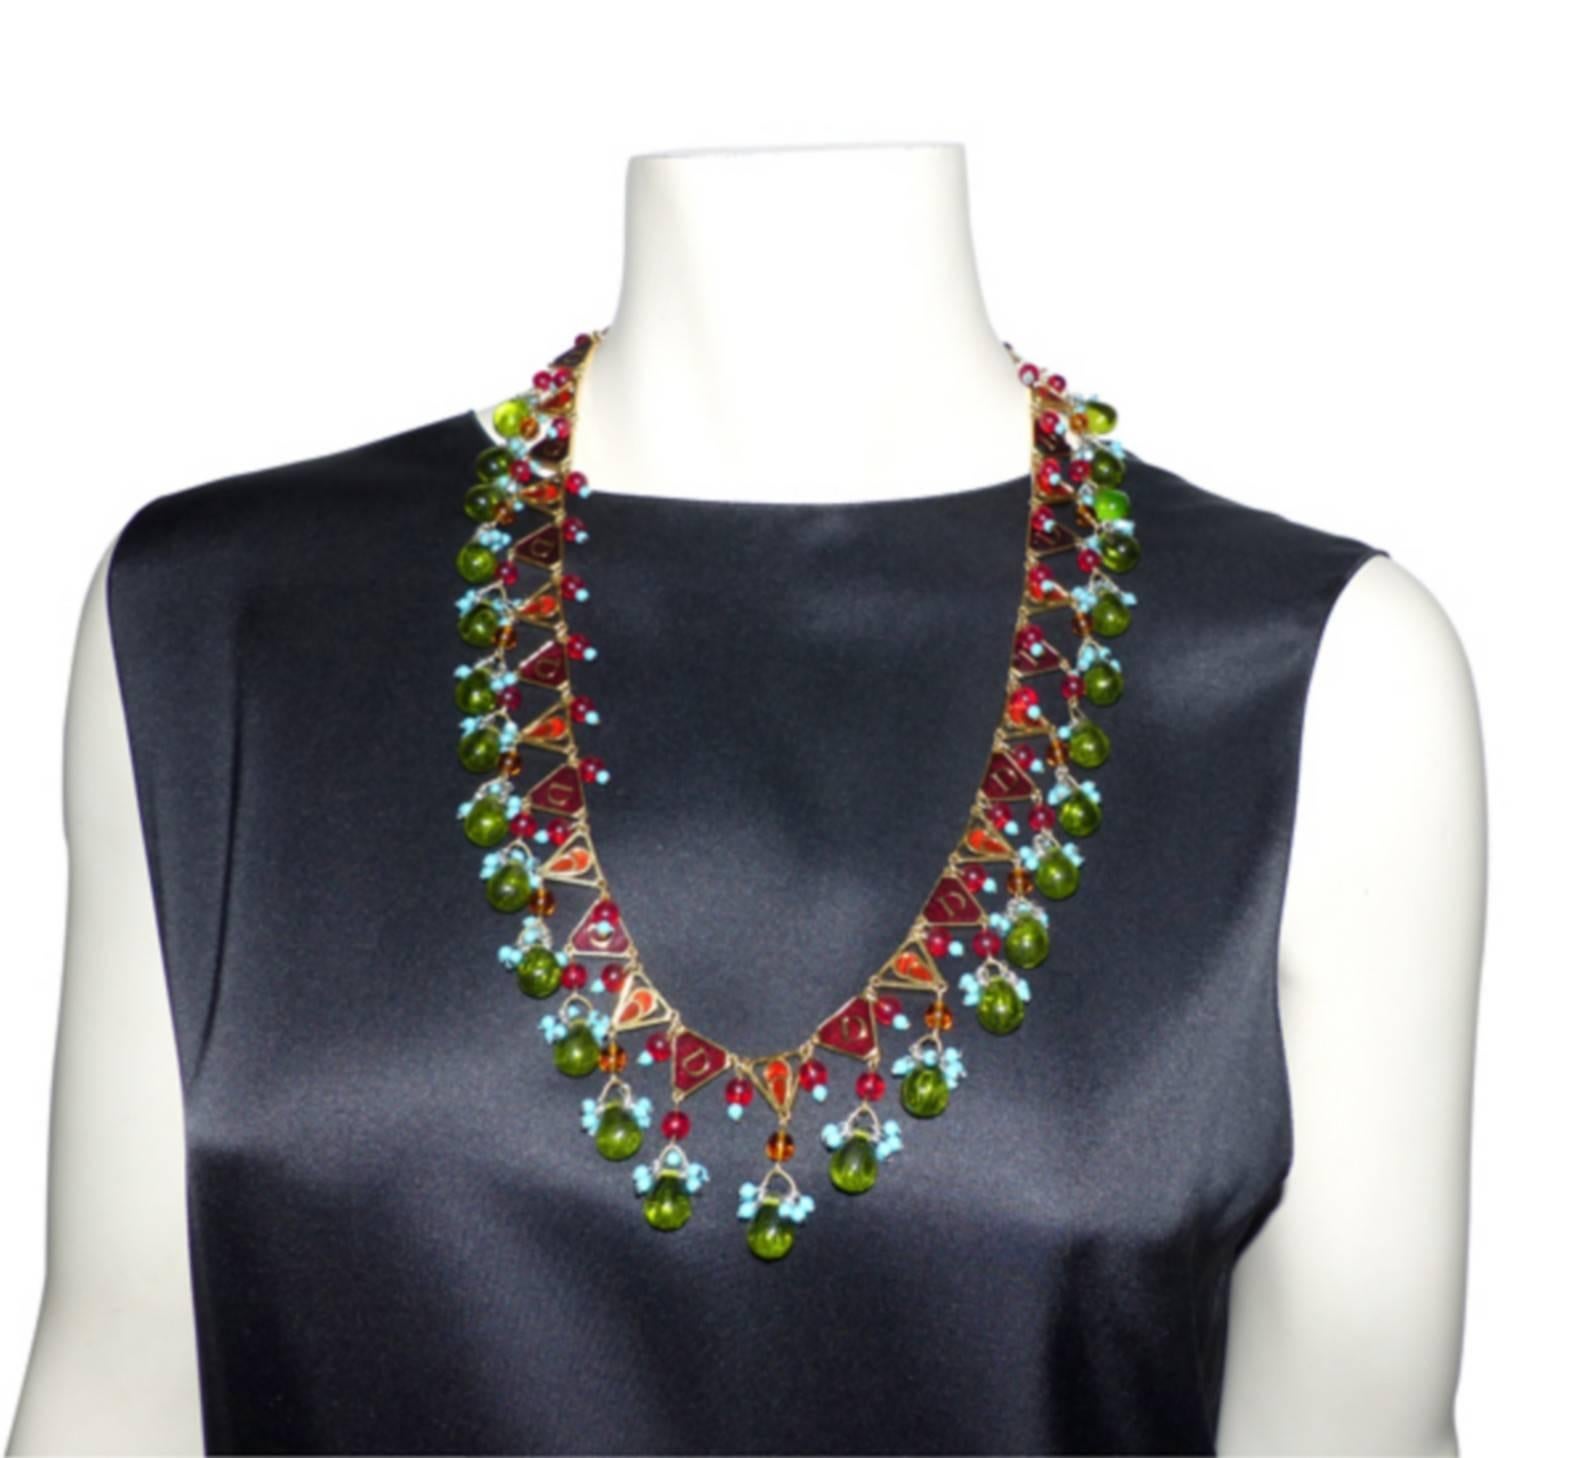 Art Deco WON-DER-FULL  Christian Dior Necklace in green glass beads red and turquoise 